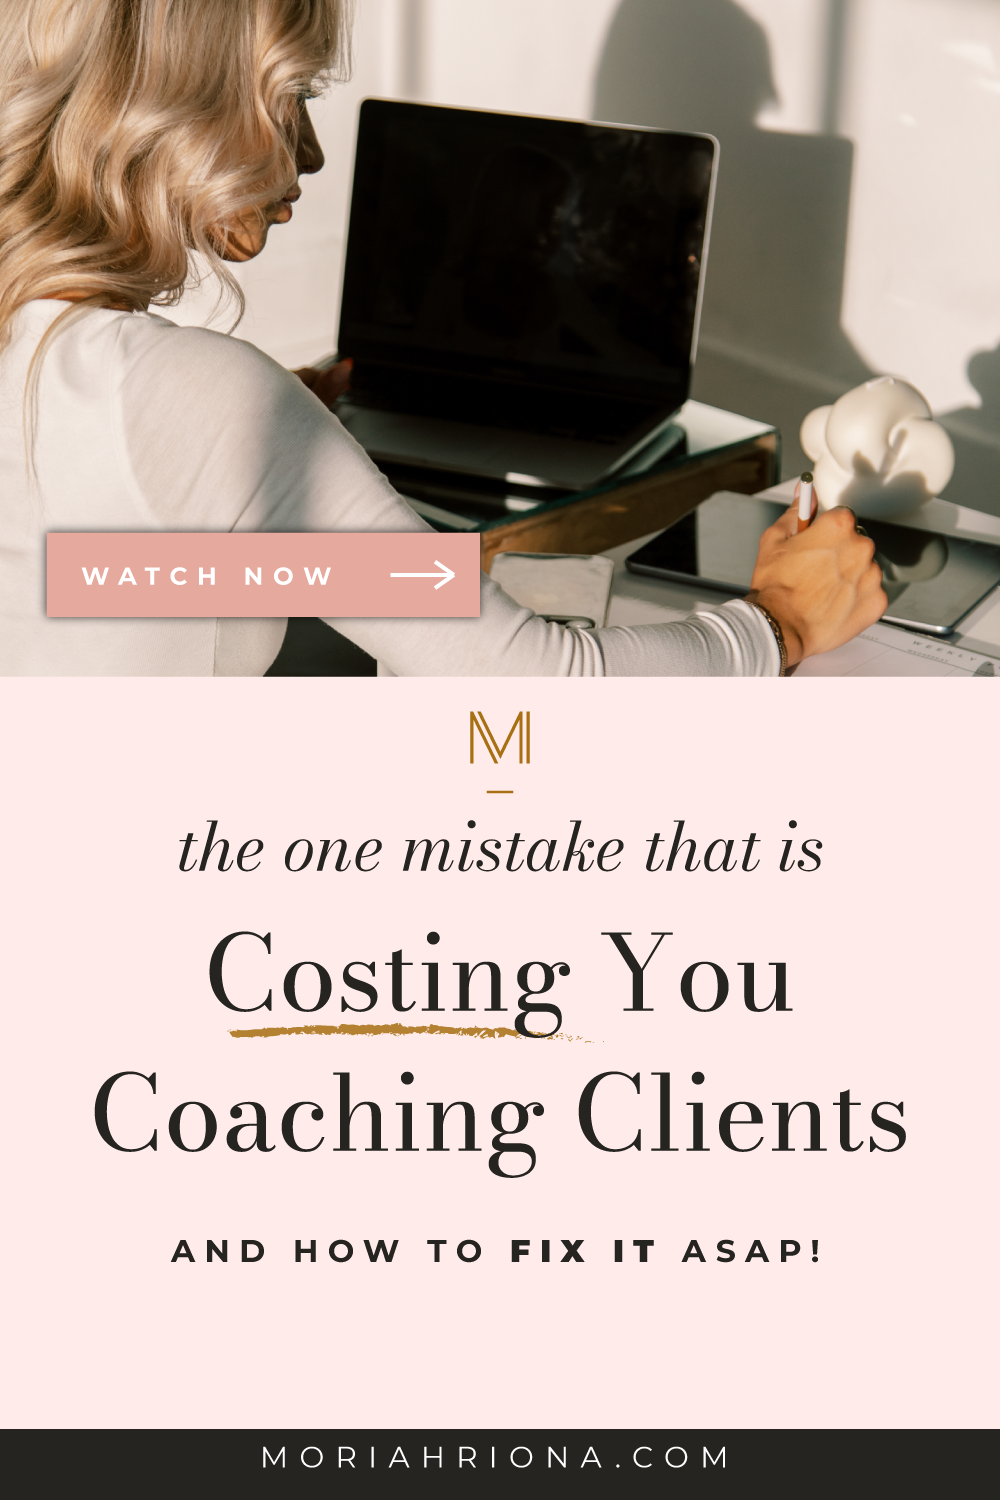 Want to know the hidden costs of a DIY website for coaches? Then this blog post is for you! Learn why DIYing your life coach website ends up costing you MORE in the long run. #luxurybrand #lifecoach #lifecoaching #femaleentrepreneur